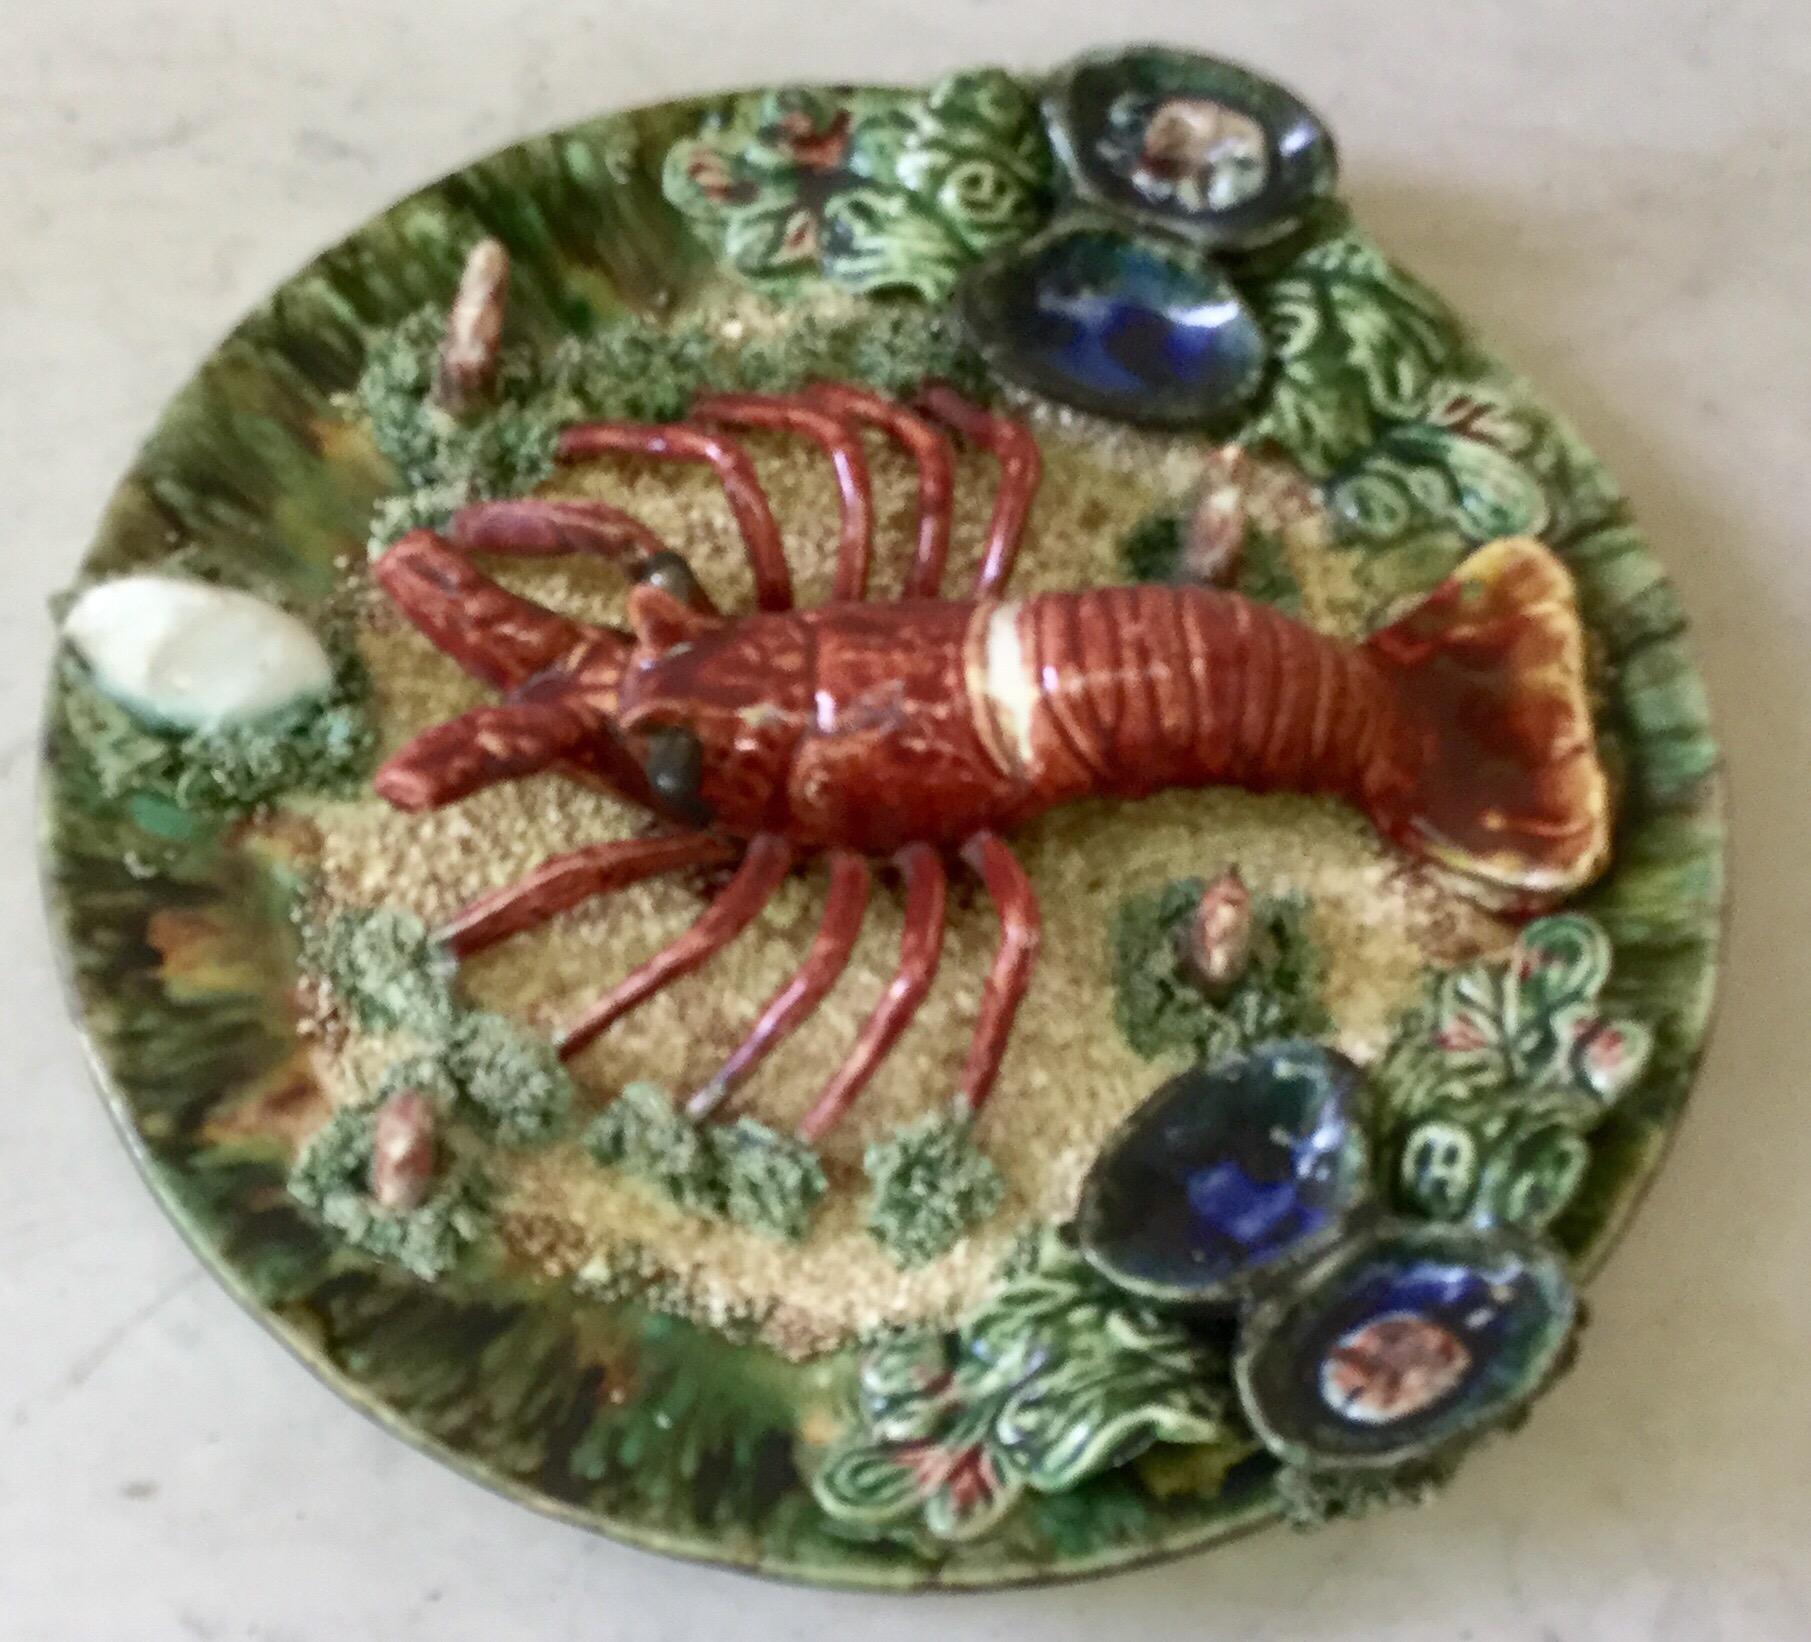 Large Majolica Palissy Portuguese lobster platter, circa 1940.
Decorated with mussels and shells,
Caldas da Rainha.